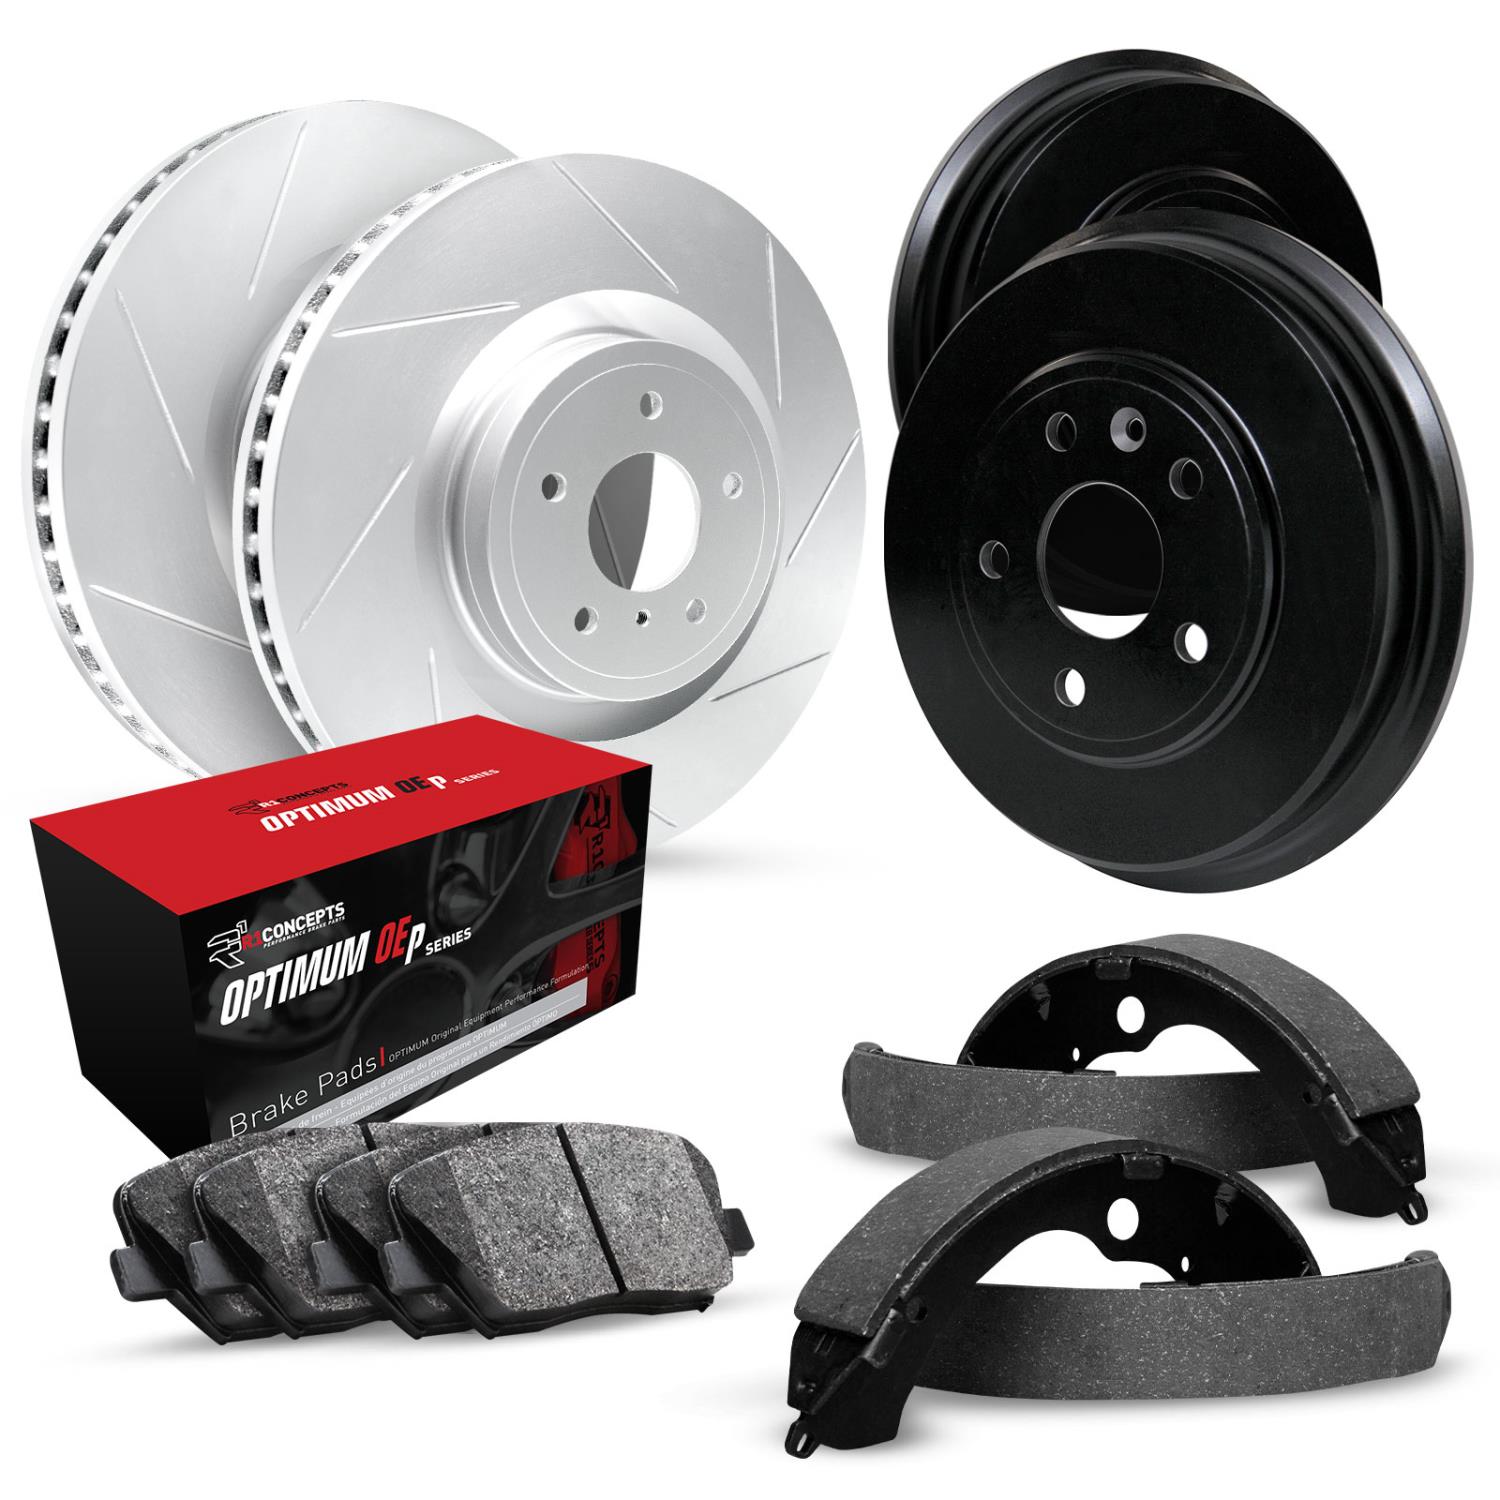 GEO-Carbon Slotted Brake Rotor & Drum Set w/Optimum OE Pads & Shoes, 1974-1975 GM, Position: Front & Rear